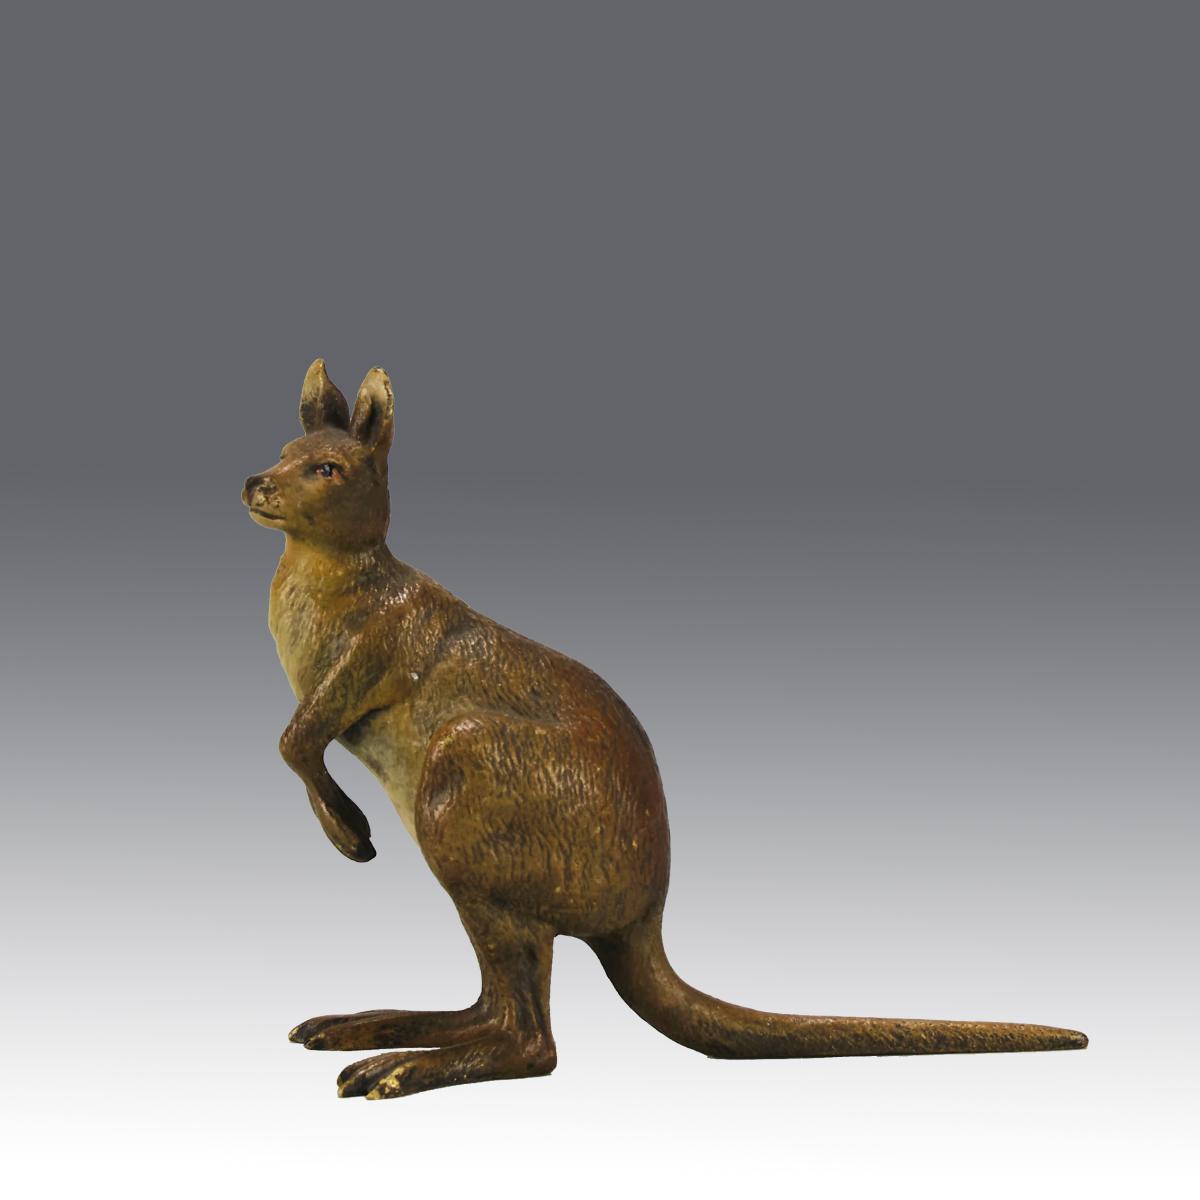 Classical Orientalist Cold-Painted Bronze entitled "Kangaroo" by Franz Bergman